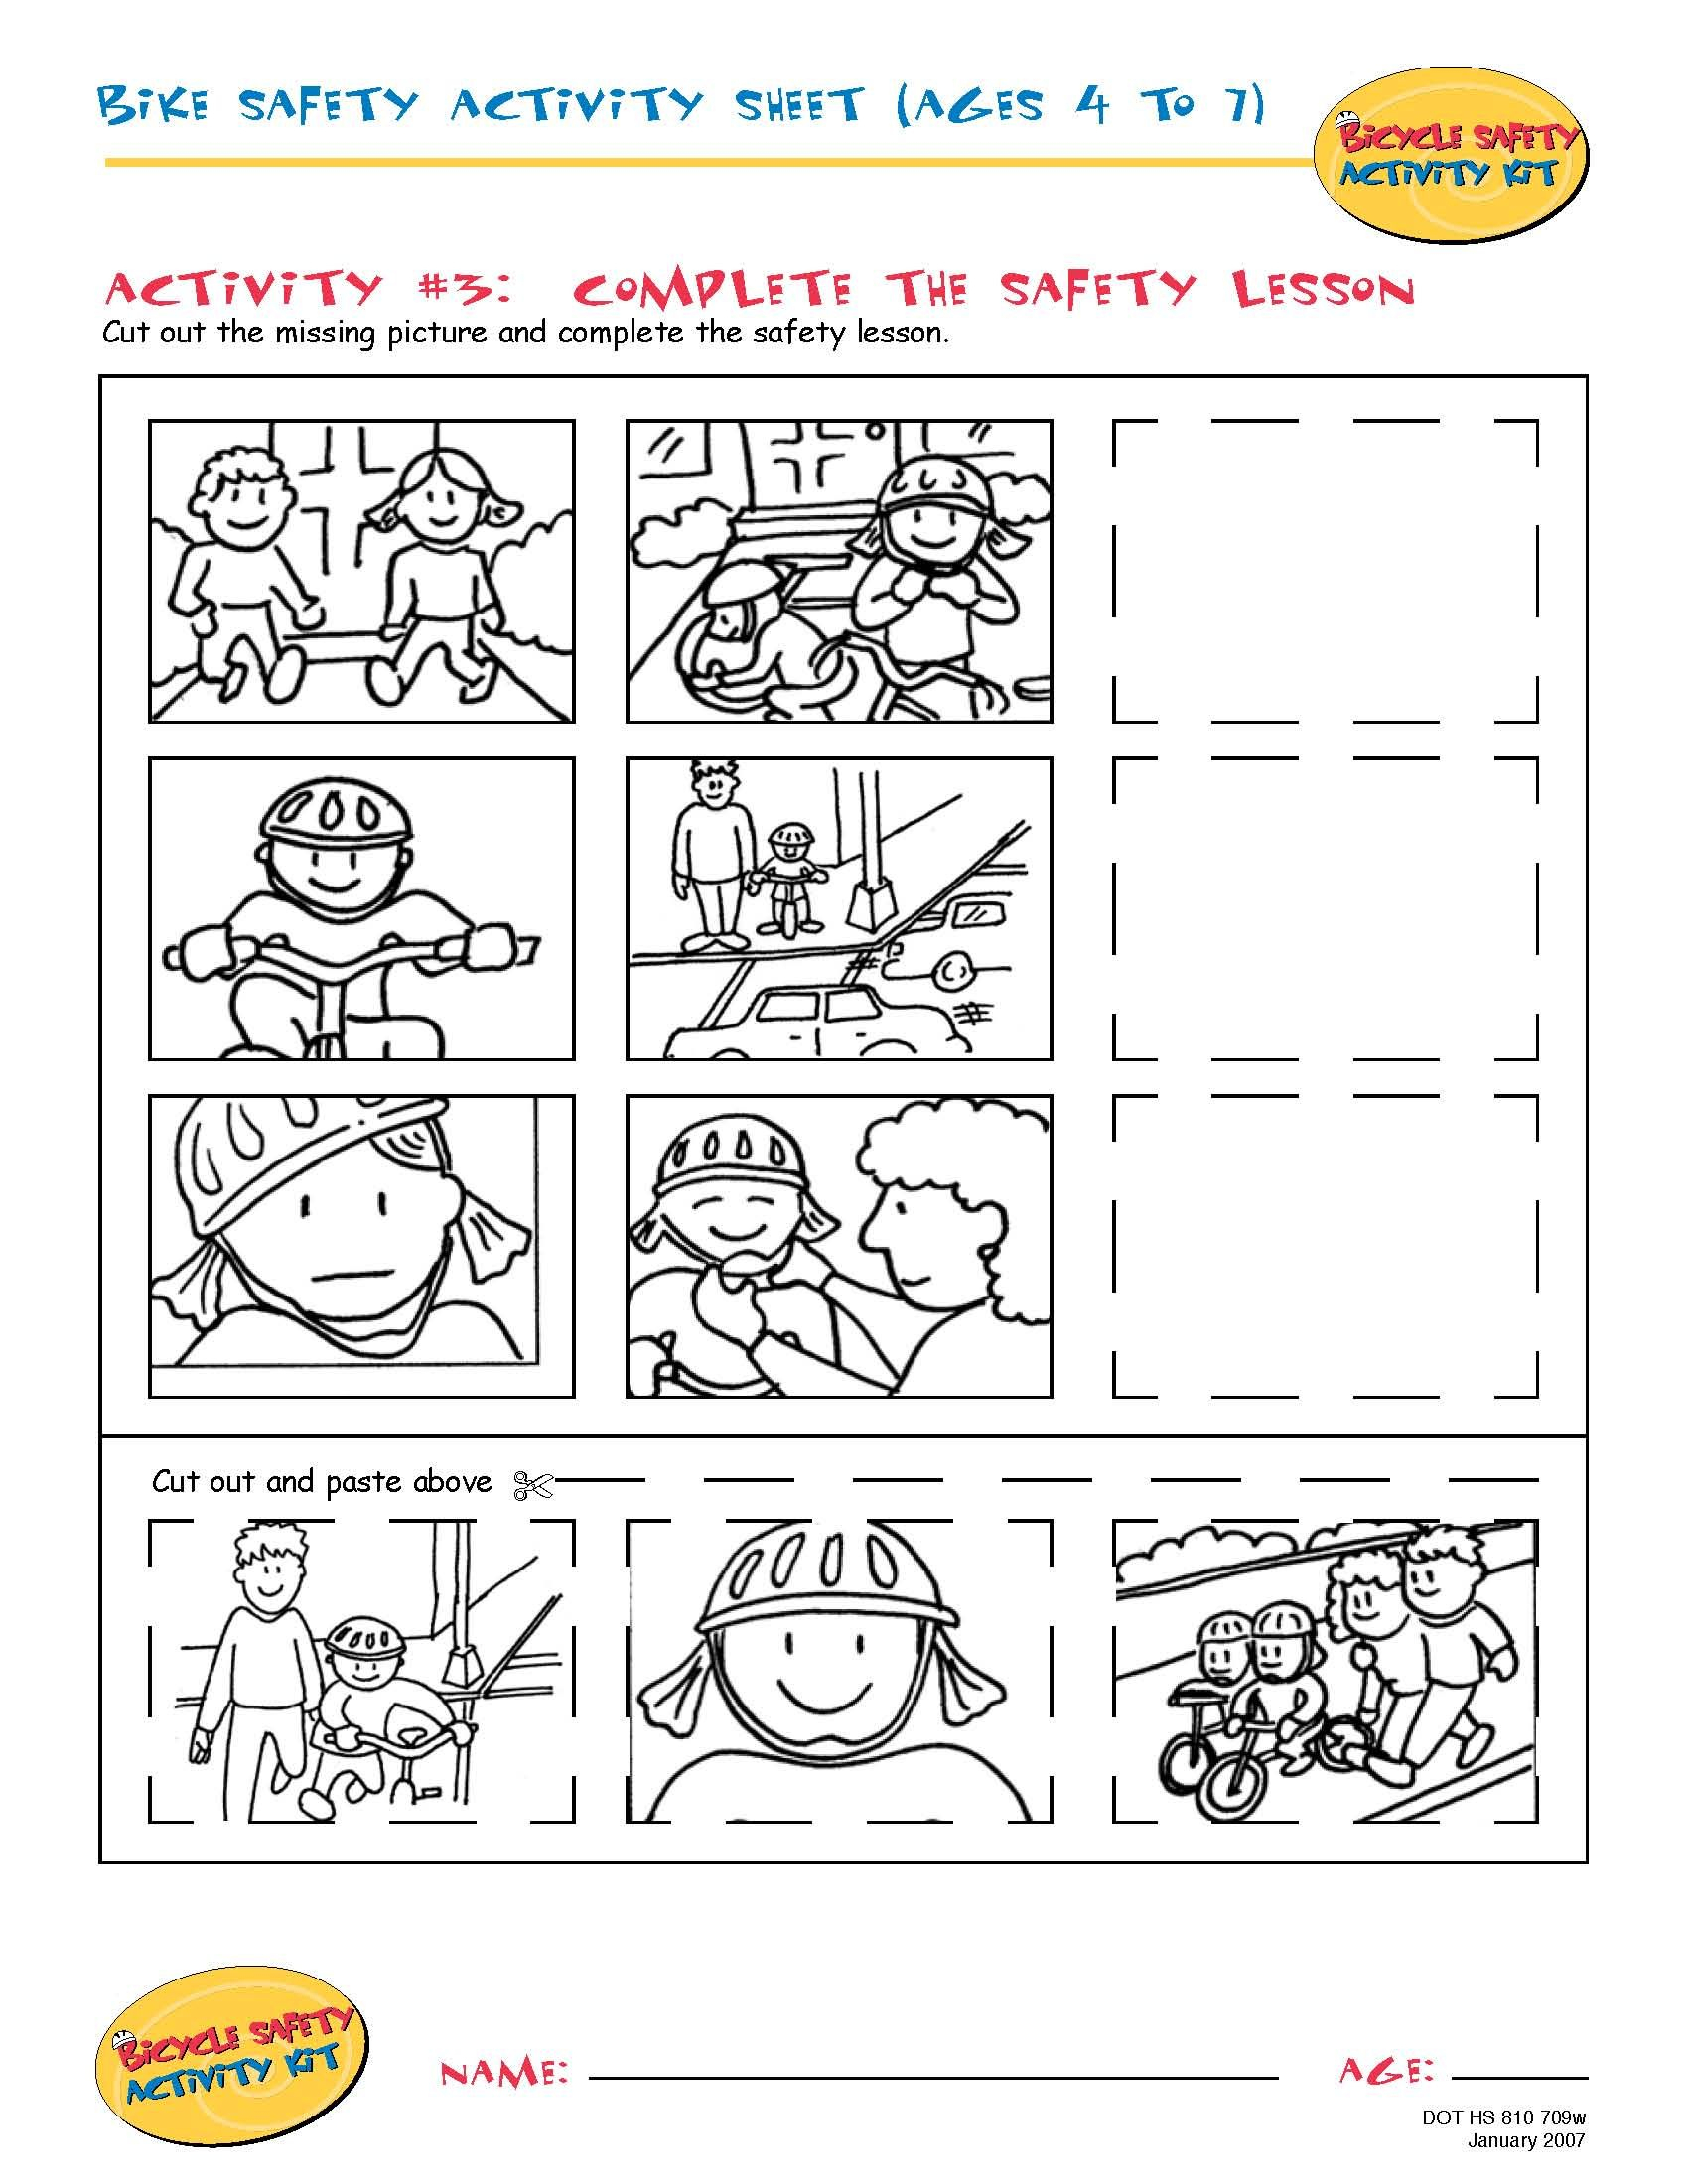 Bike Safety Activity Sheet (Ages 4 To 11) Complete The